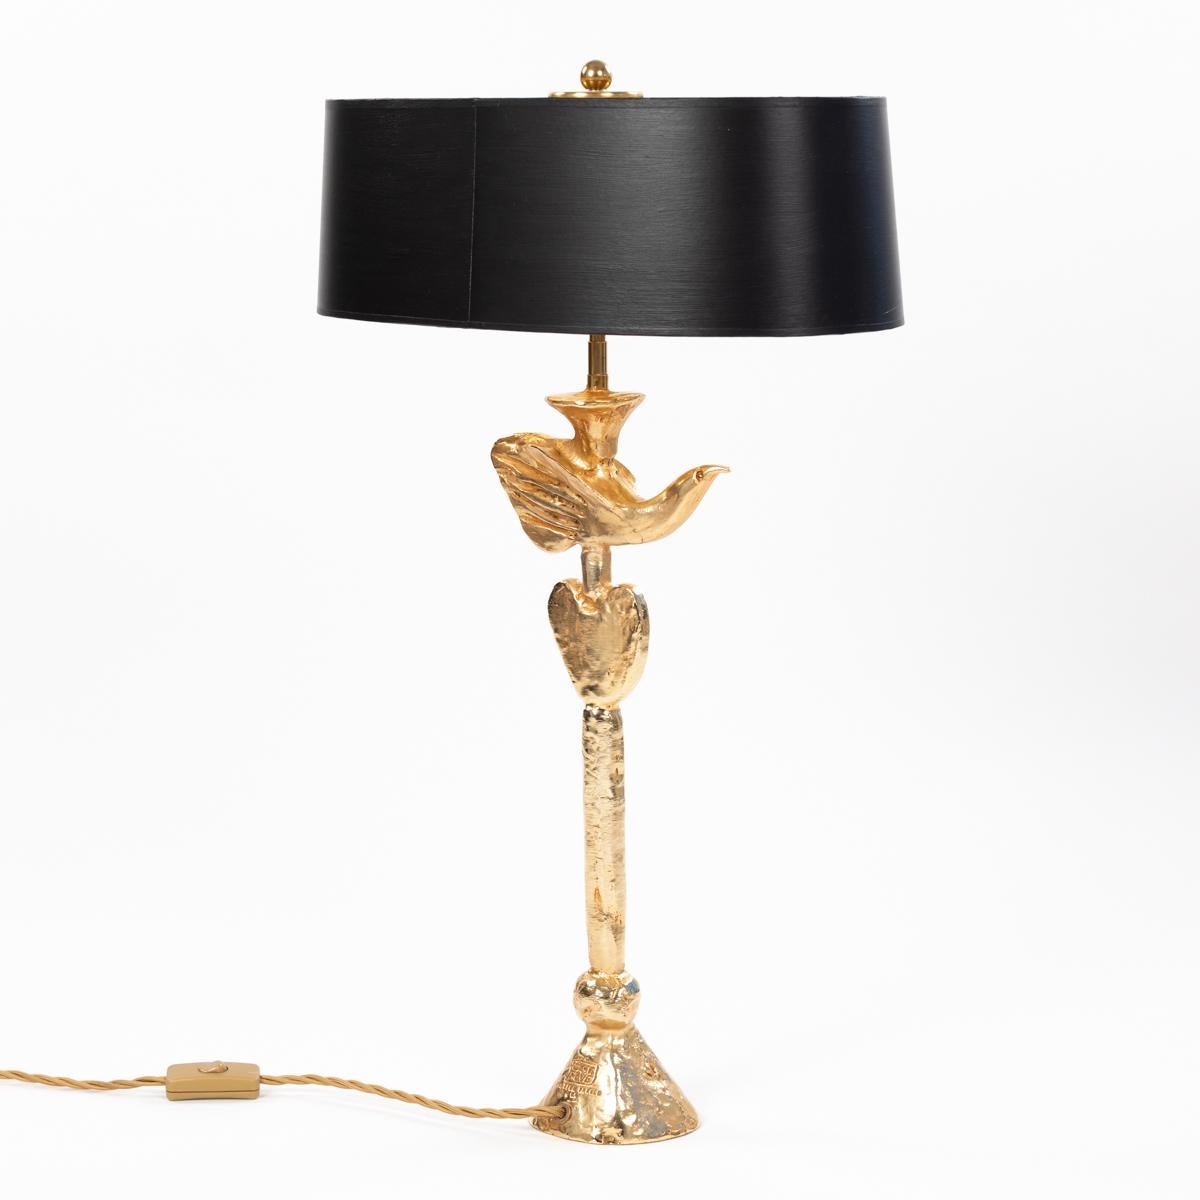 Late 20th Century French Gilded Bronze Table Lamp by Pierre Casenove for Fondica, 1980s For Sale